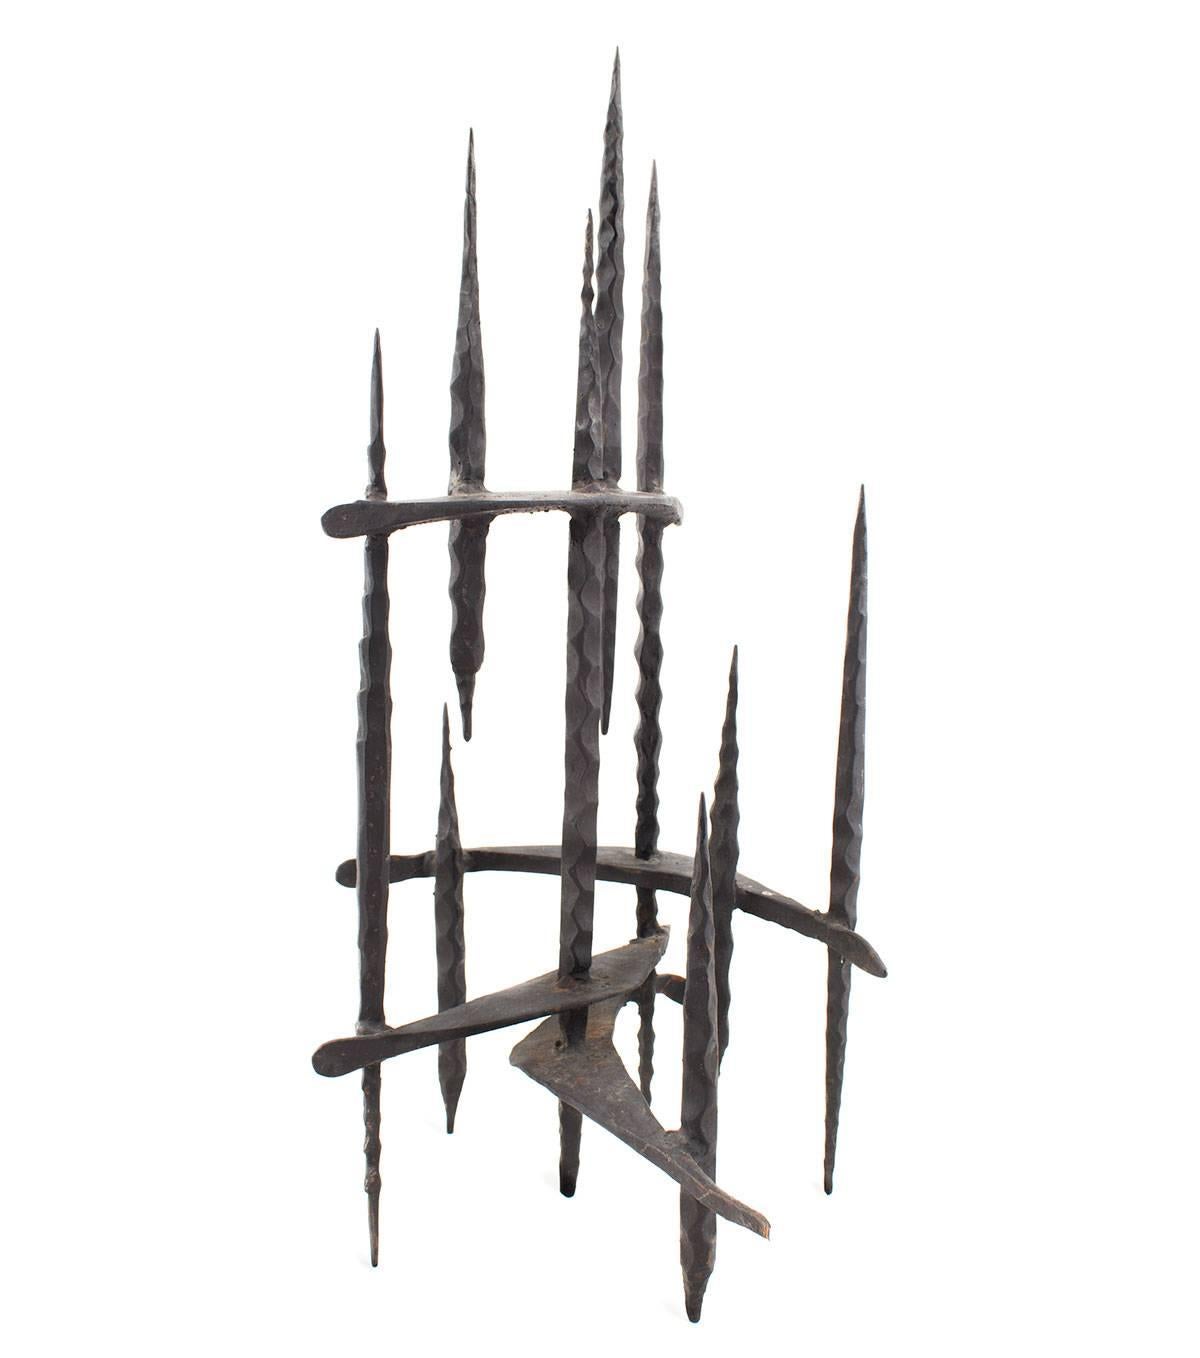 Hand Forged Iron Candelabra 
Holocaust Memorial Judaic Menorah Sculpture


David Palombo was an Israeli sculptor and painter. He was born in Turkey to a traditional family and immigrated to the Land of Israel with his parents in 1923. They lived in